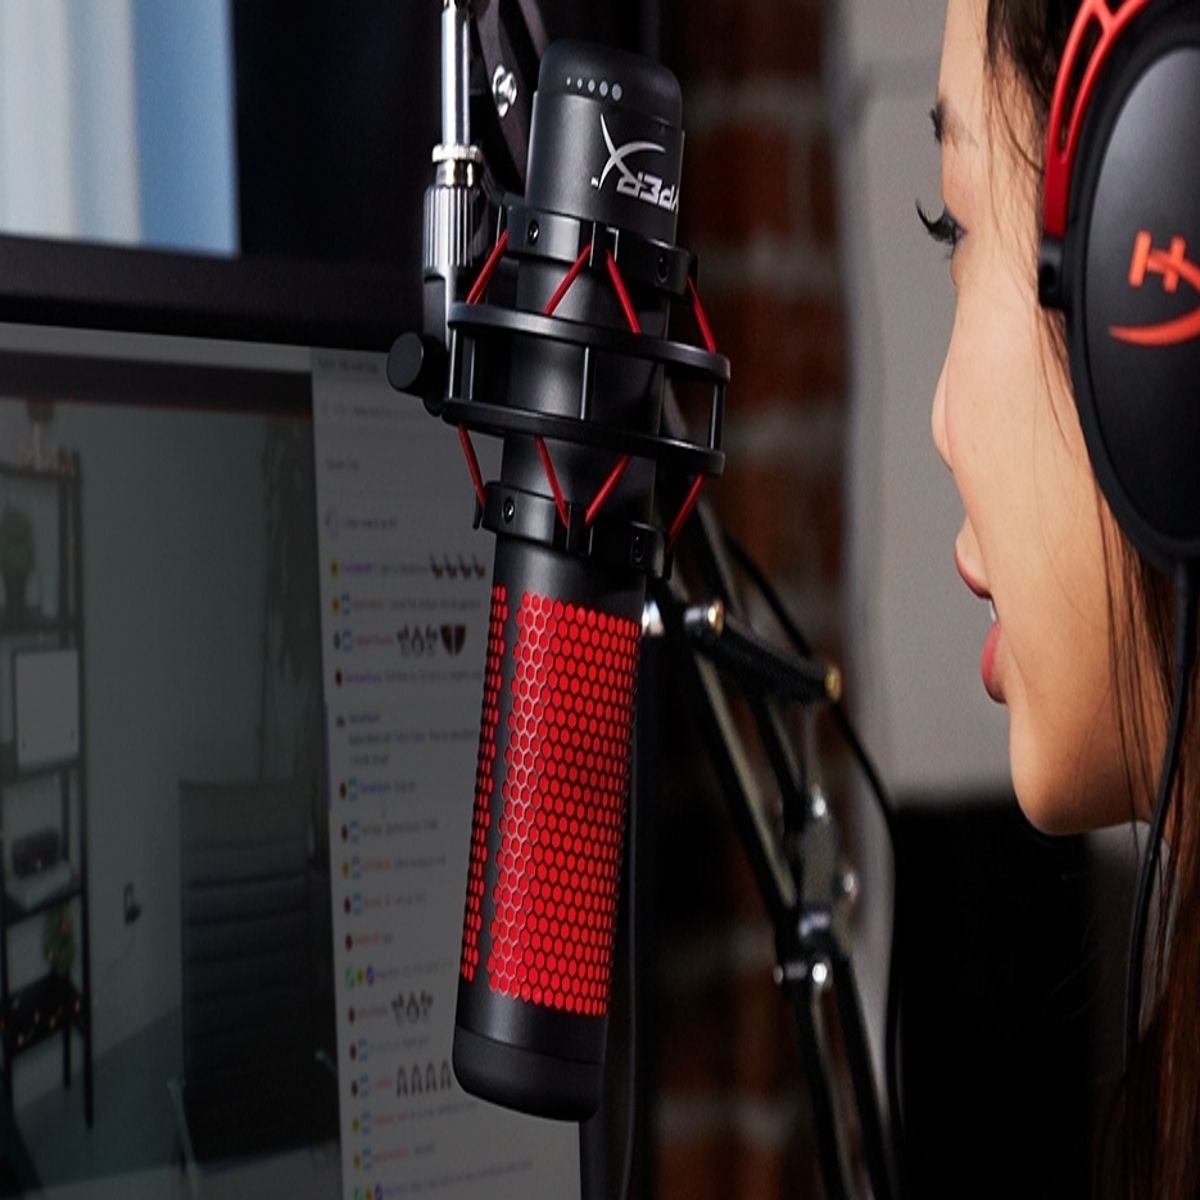 https://assetsio.reedpopcdn.com/best-gaming-mic-2019-xlr-and-usb-microphones-for-streaming-and-youtube-1554302497029.jpg?width=1200&height=1200&fit=crop&quality=100&format=png&enable=upscale&auto=webp